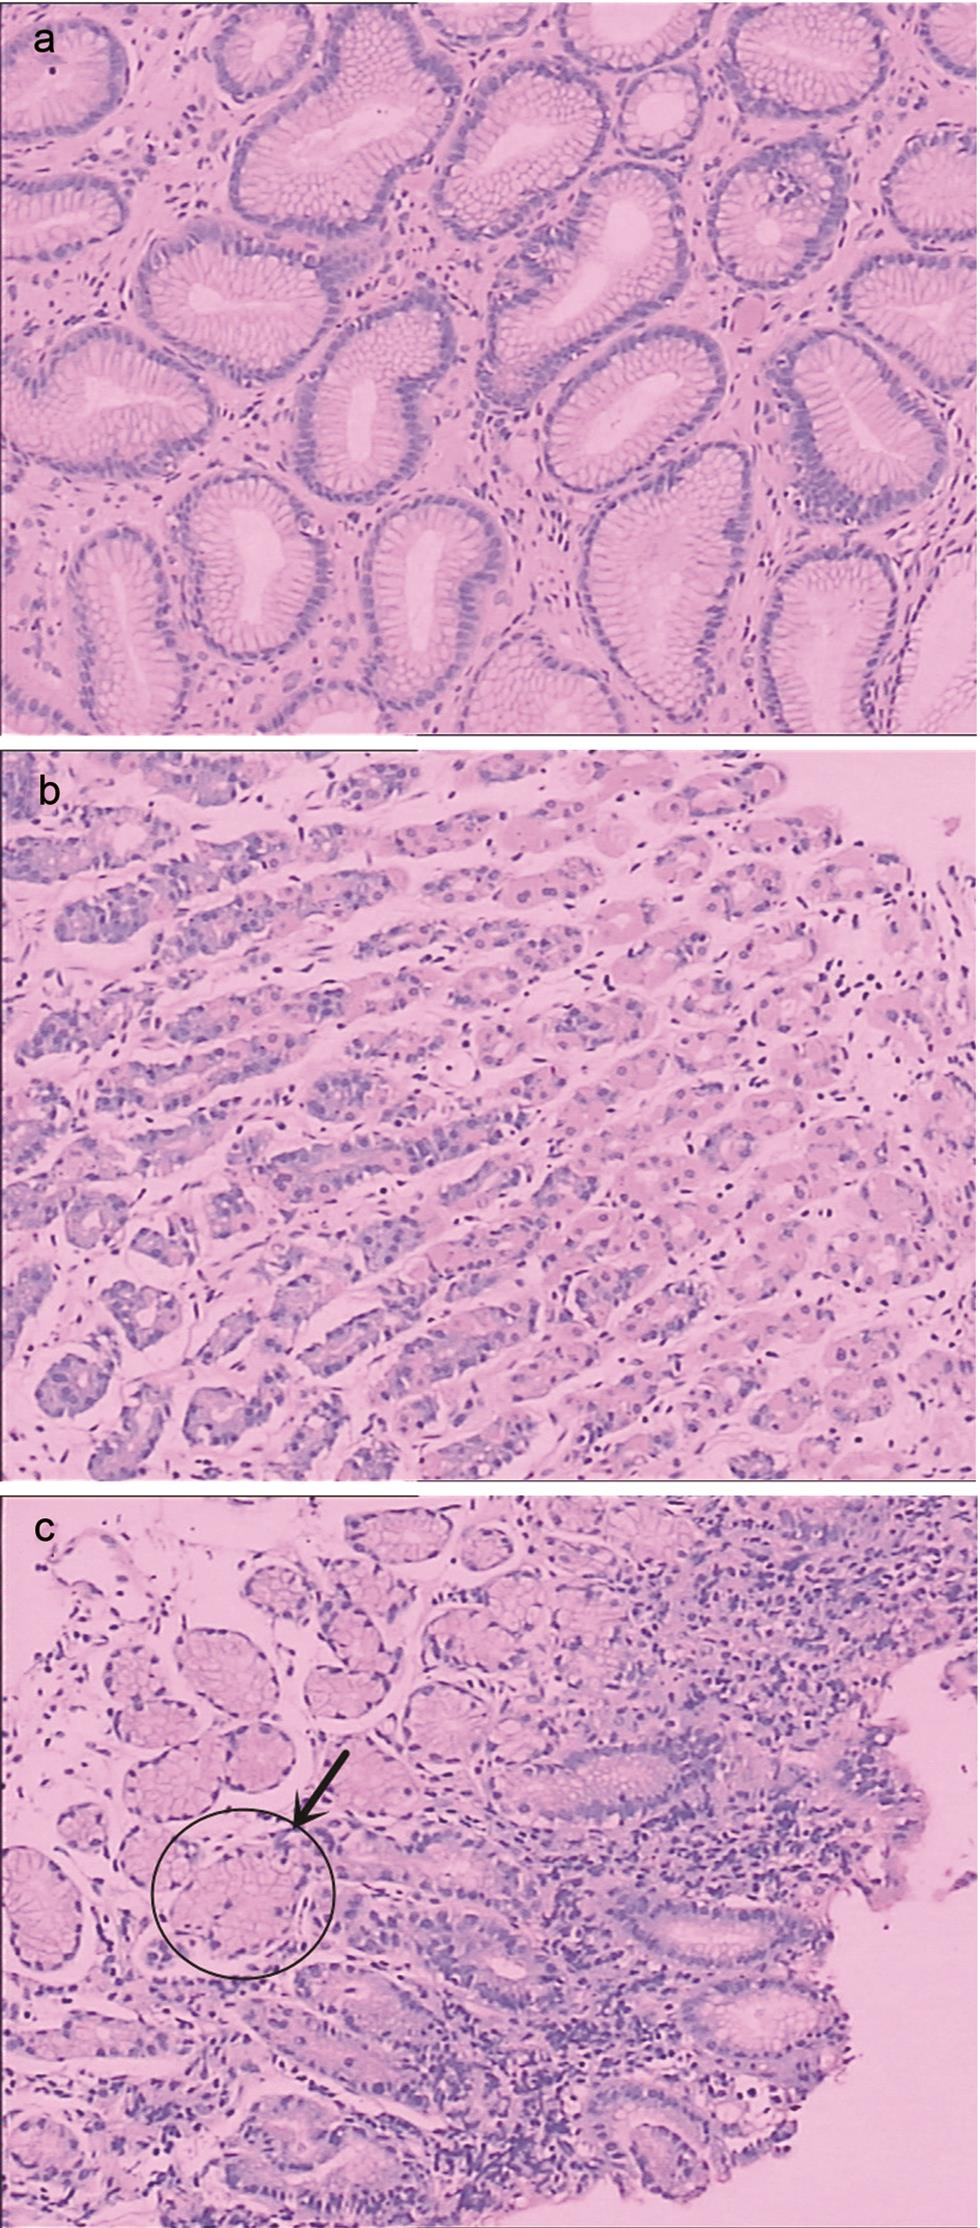 Gastric glands and antralization.